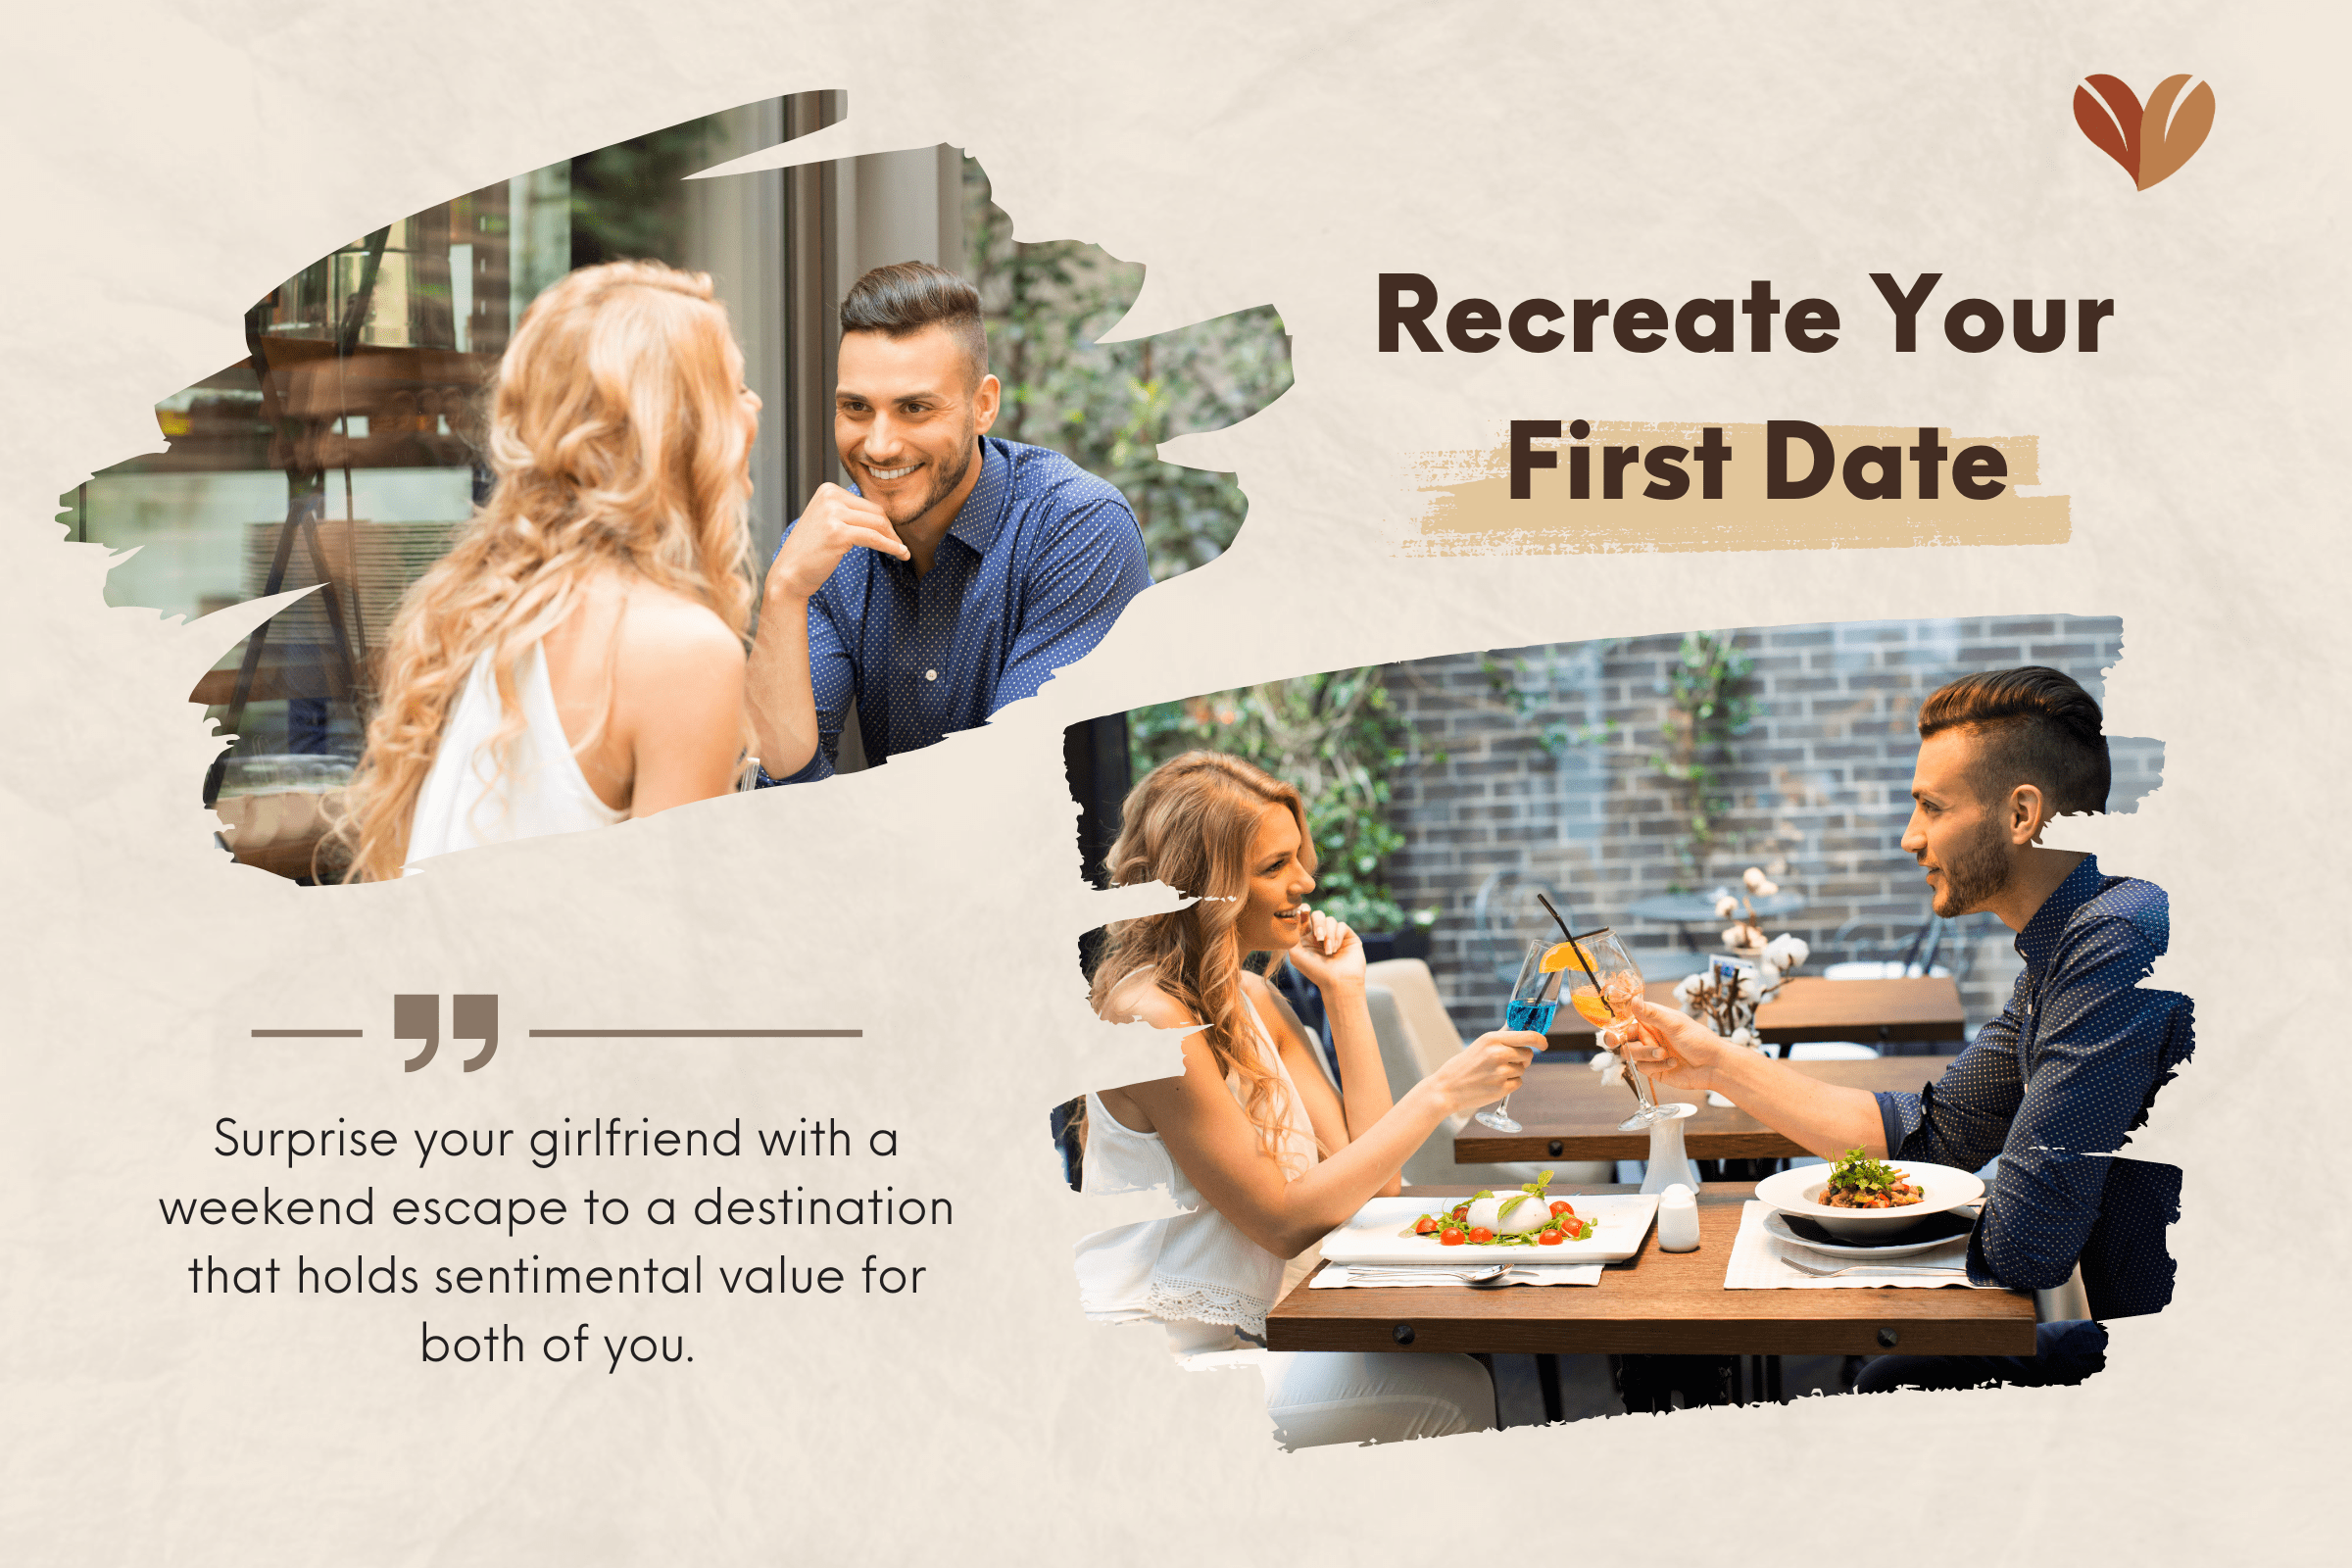 Recreate your first date is one of 1-year anniversary ideas for girlfriend